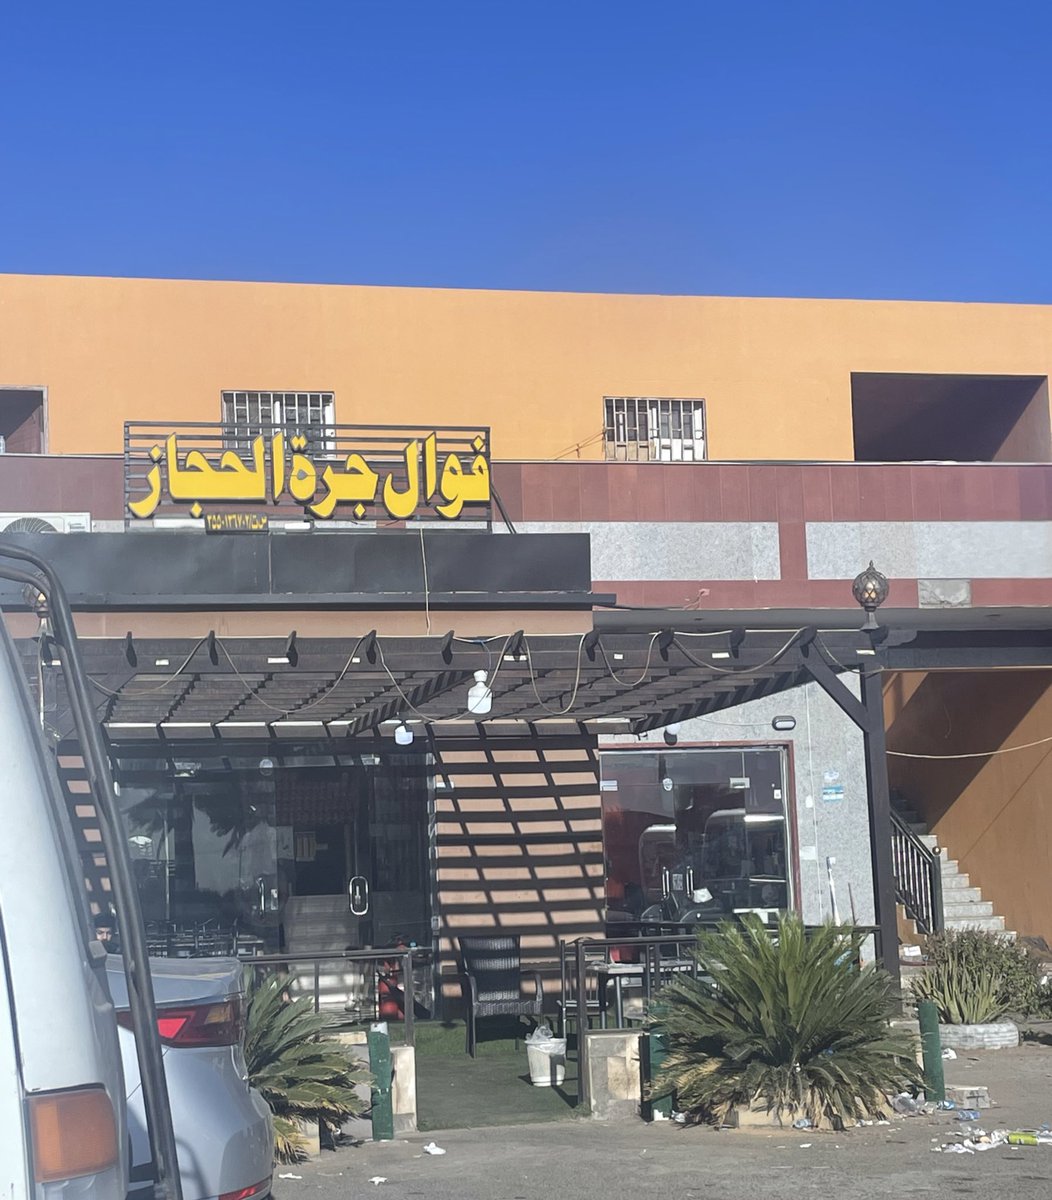 Just come out to get some Arabic breakfast to take to the sand dunes 🏜️ 🐪